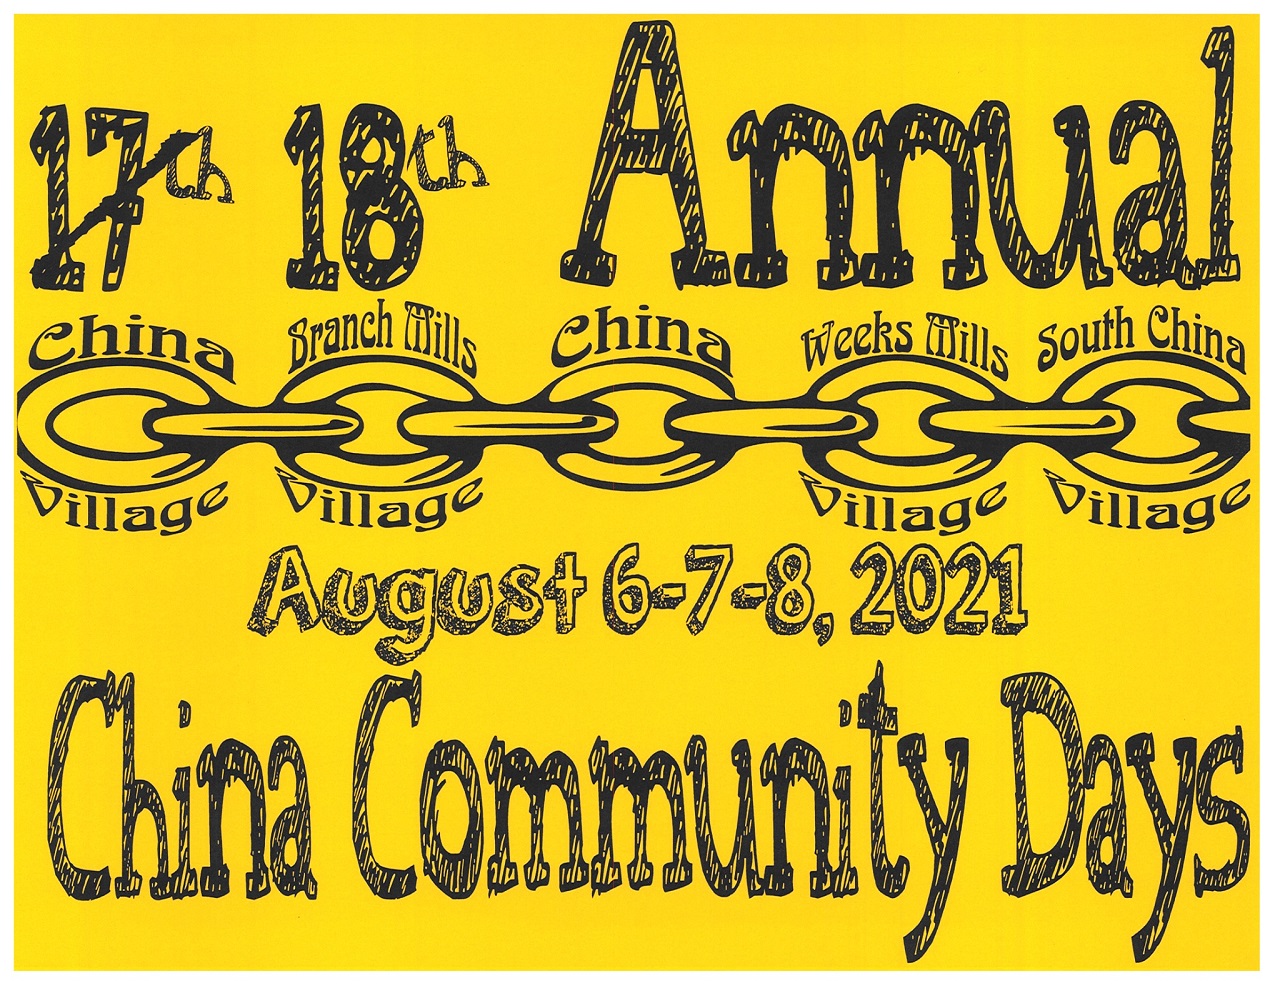 18th annual China Community Days set for Aug. 6-8, 2021